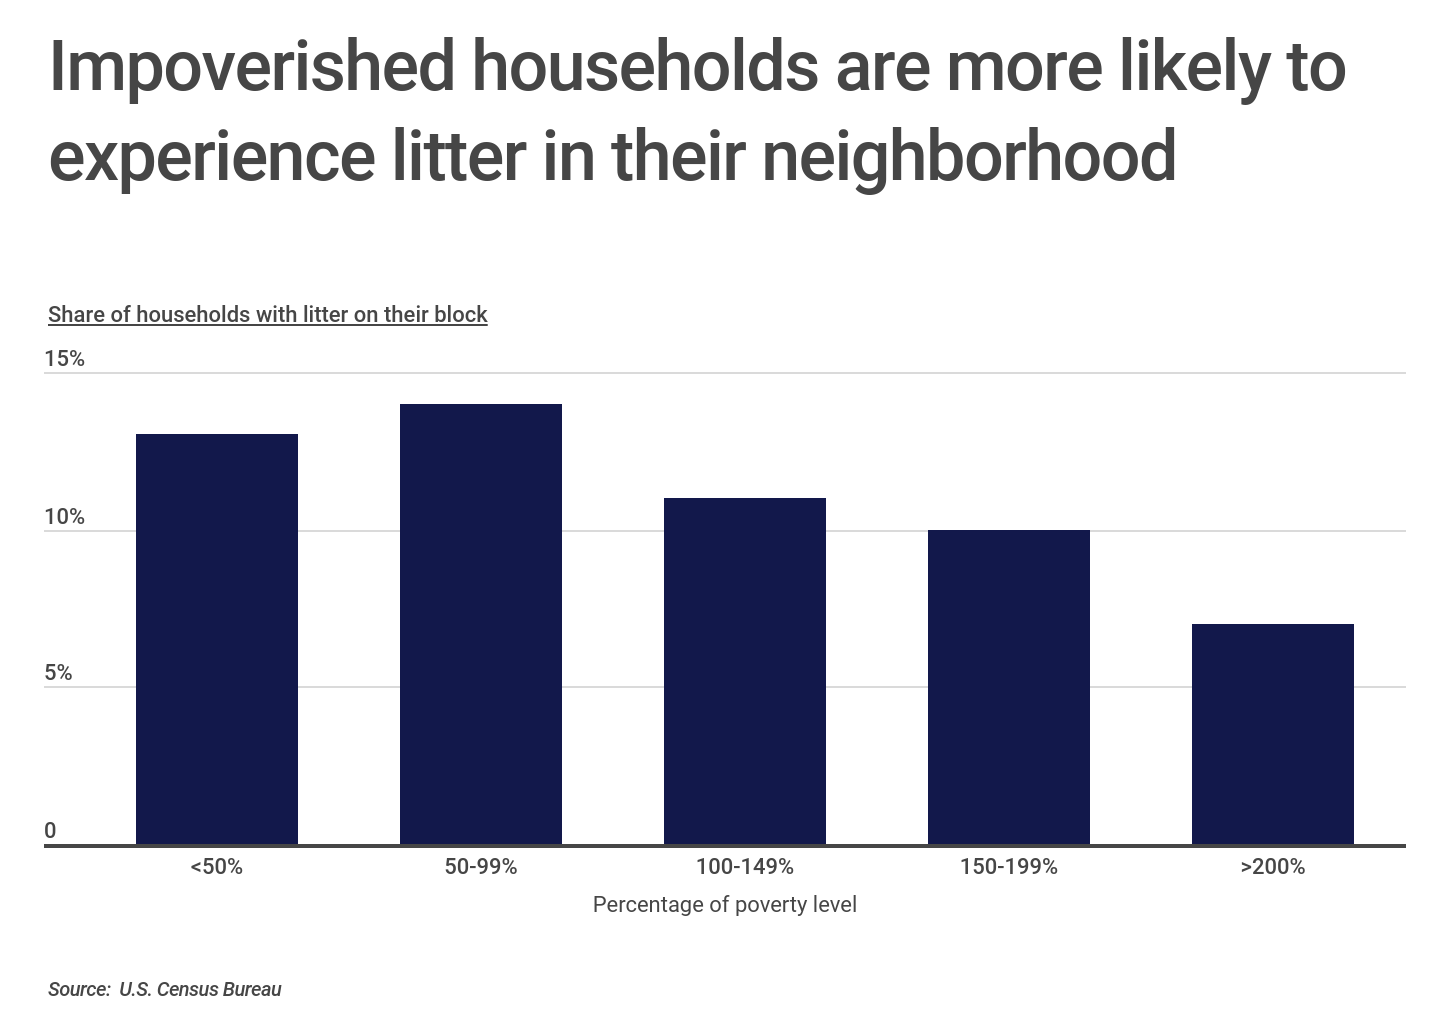 Chart1_Impoverished homes are more likely to have litter in neighborhood